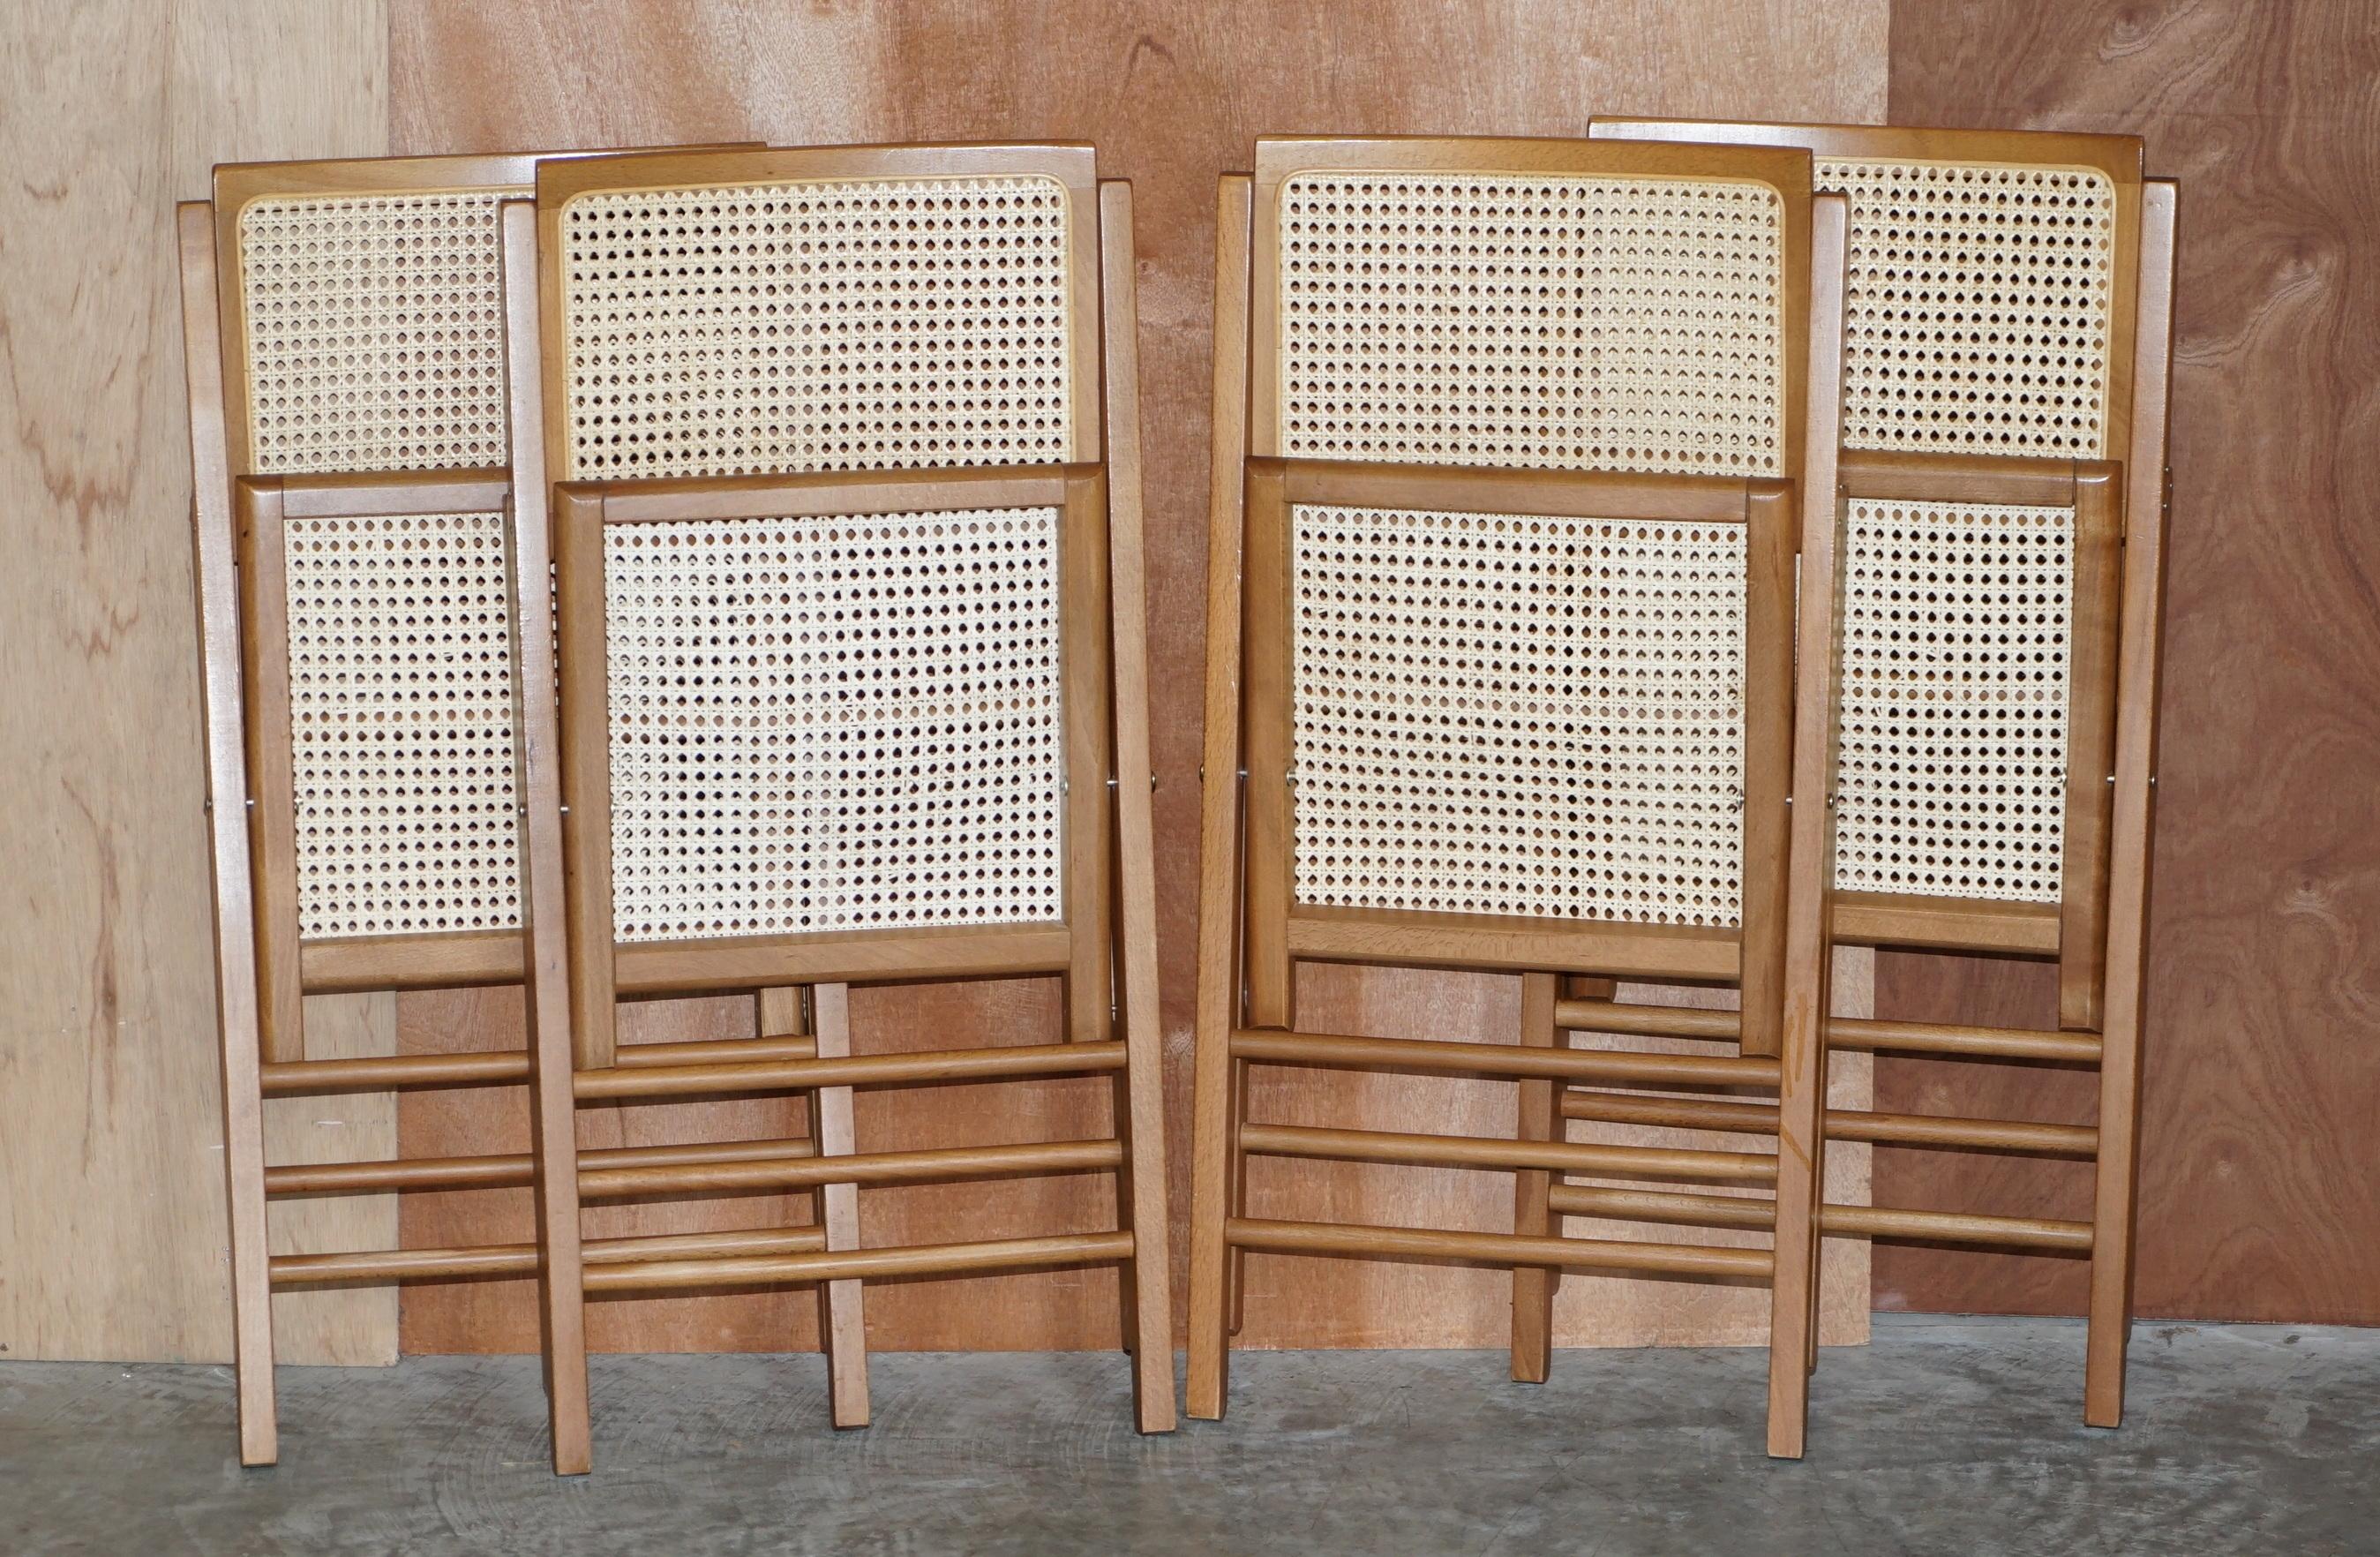 We are delighted to offer for sale this lovely suite of four beech wood bergere rattan Military Campaign style folding chairs

A very good looking and well made suite, they fold away nicely and take up almost no room at all

In terms of the